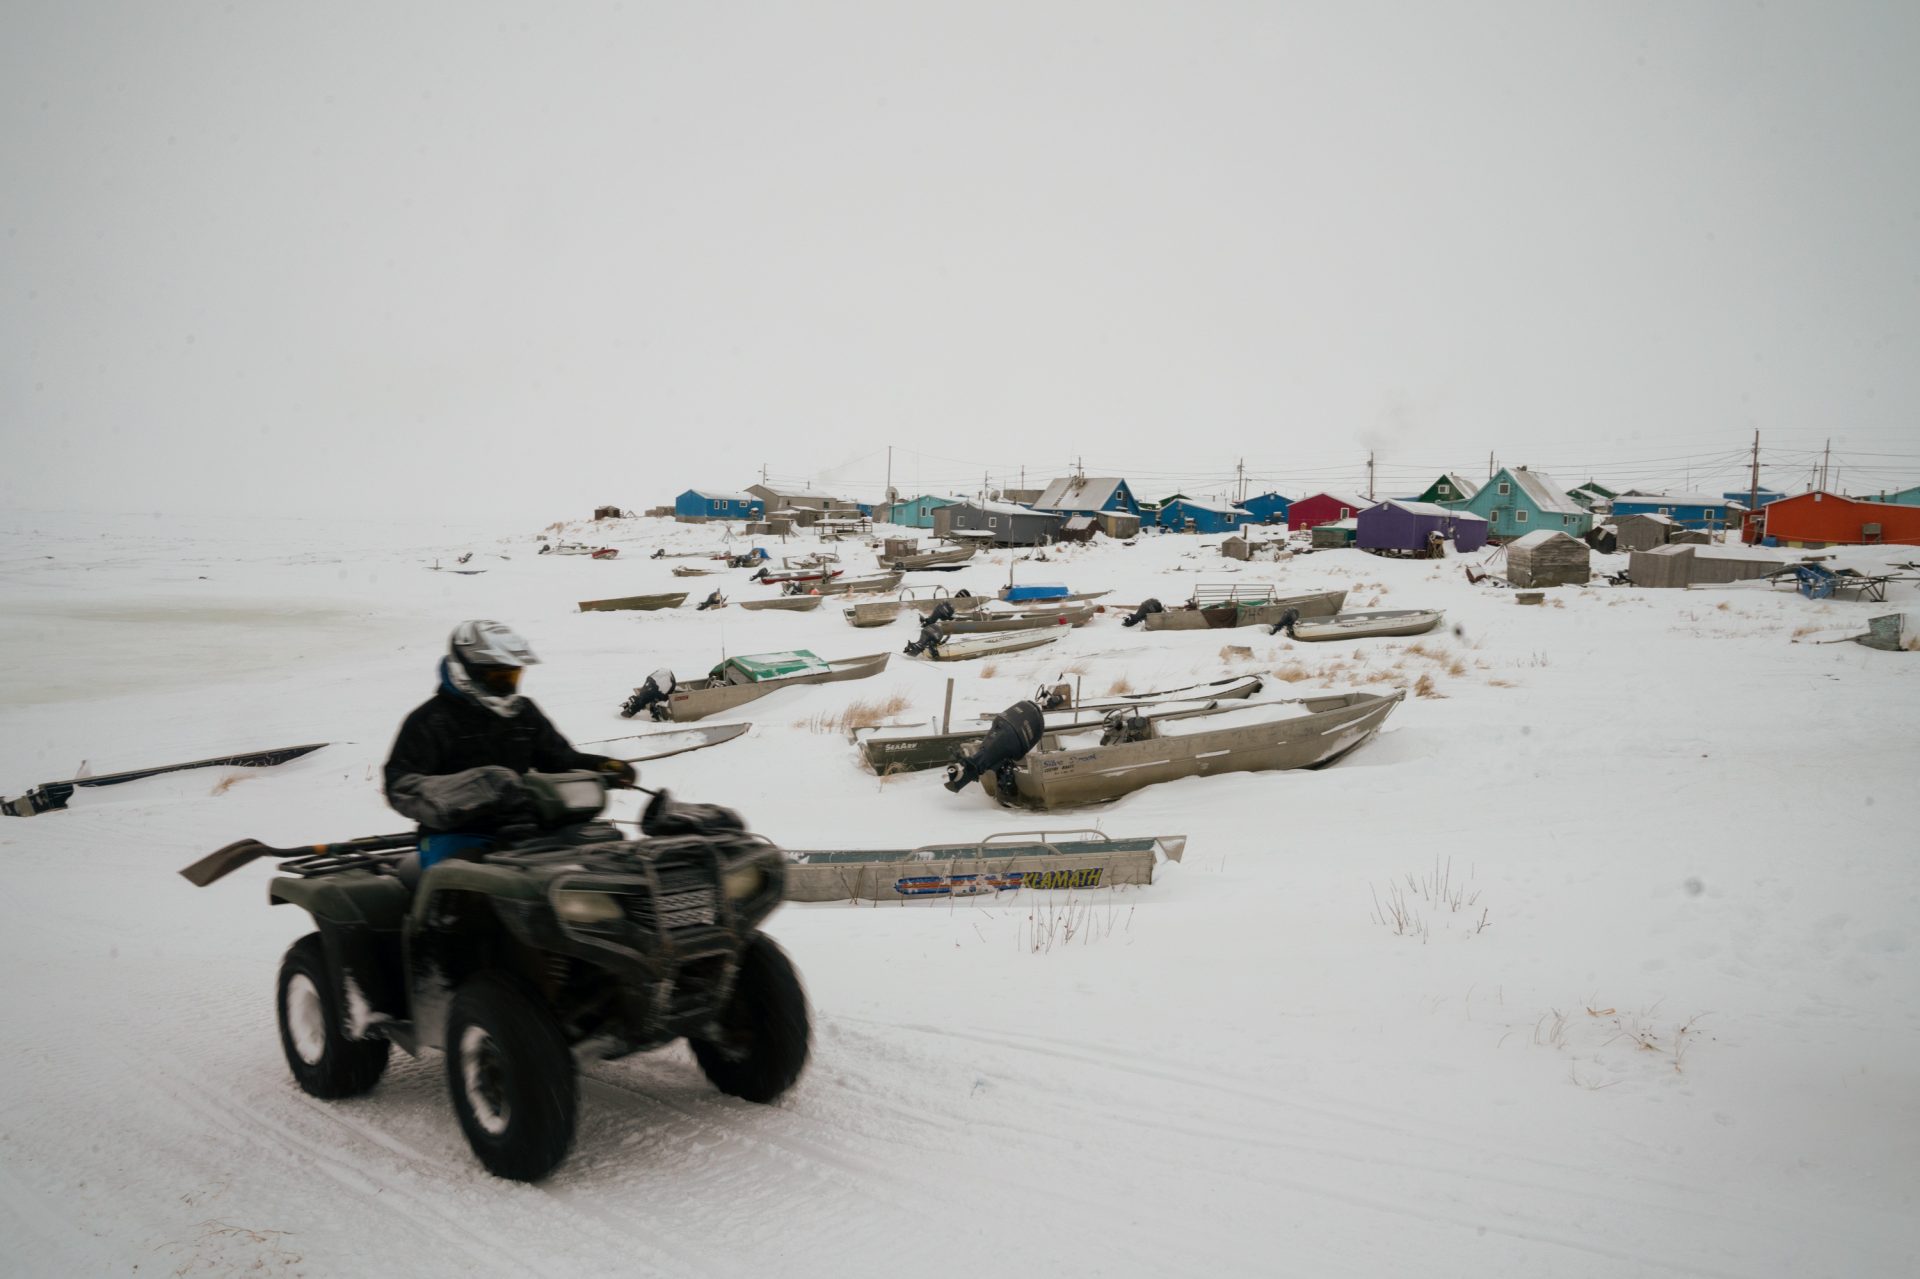 A person on an all-terrain vehicle drives past boats at the edge of Toksook Bay. During winter, census workers are able to journey across miles of frozen ground and ice roads to reach villages usually accessible only by plane or boat in the warmer months.